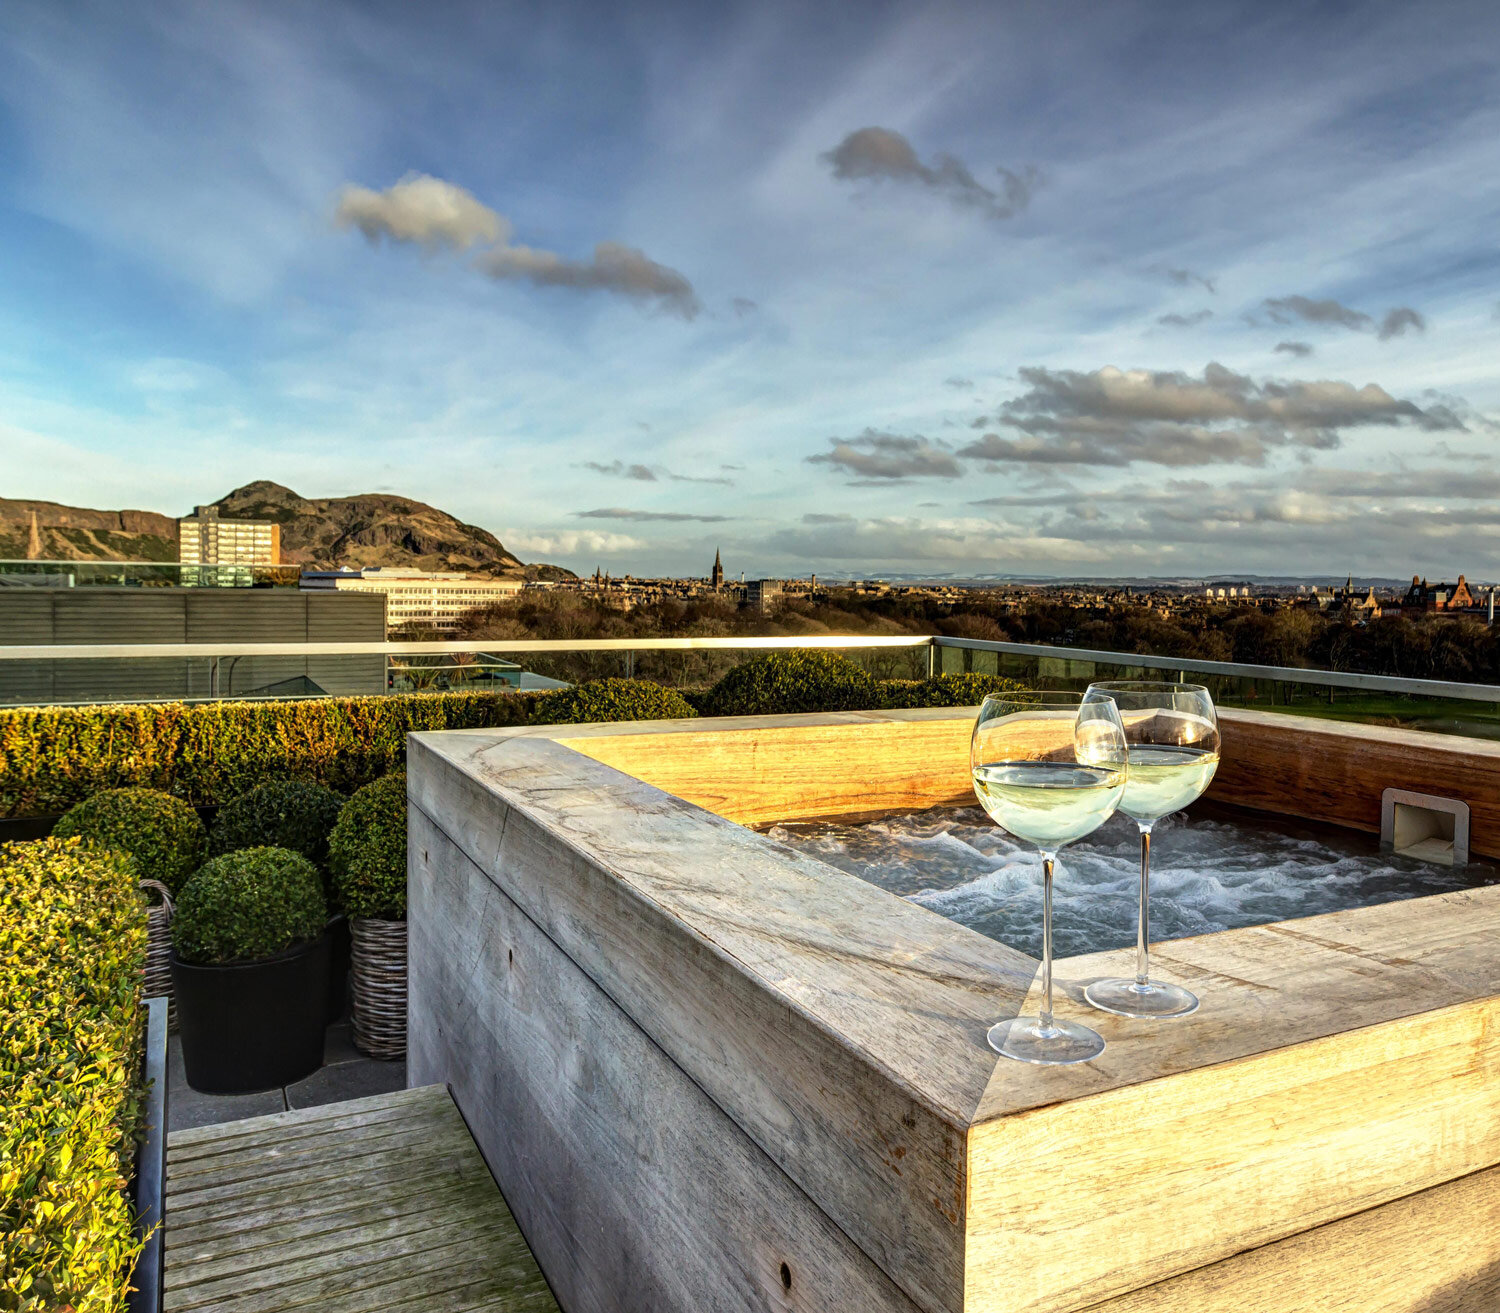 Design for an Edinburgh Roof Garden with views to Arthur's Seat